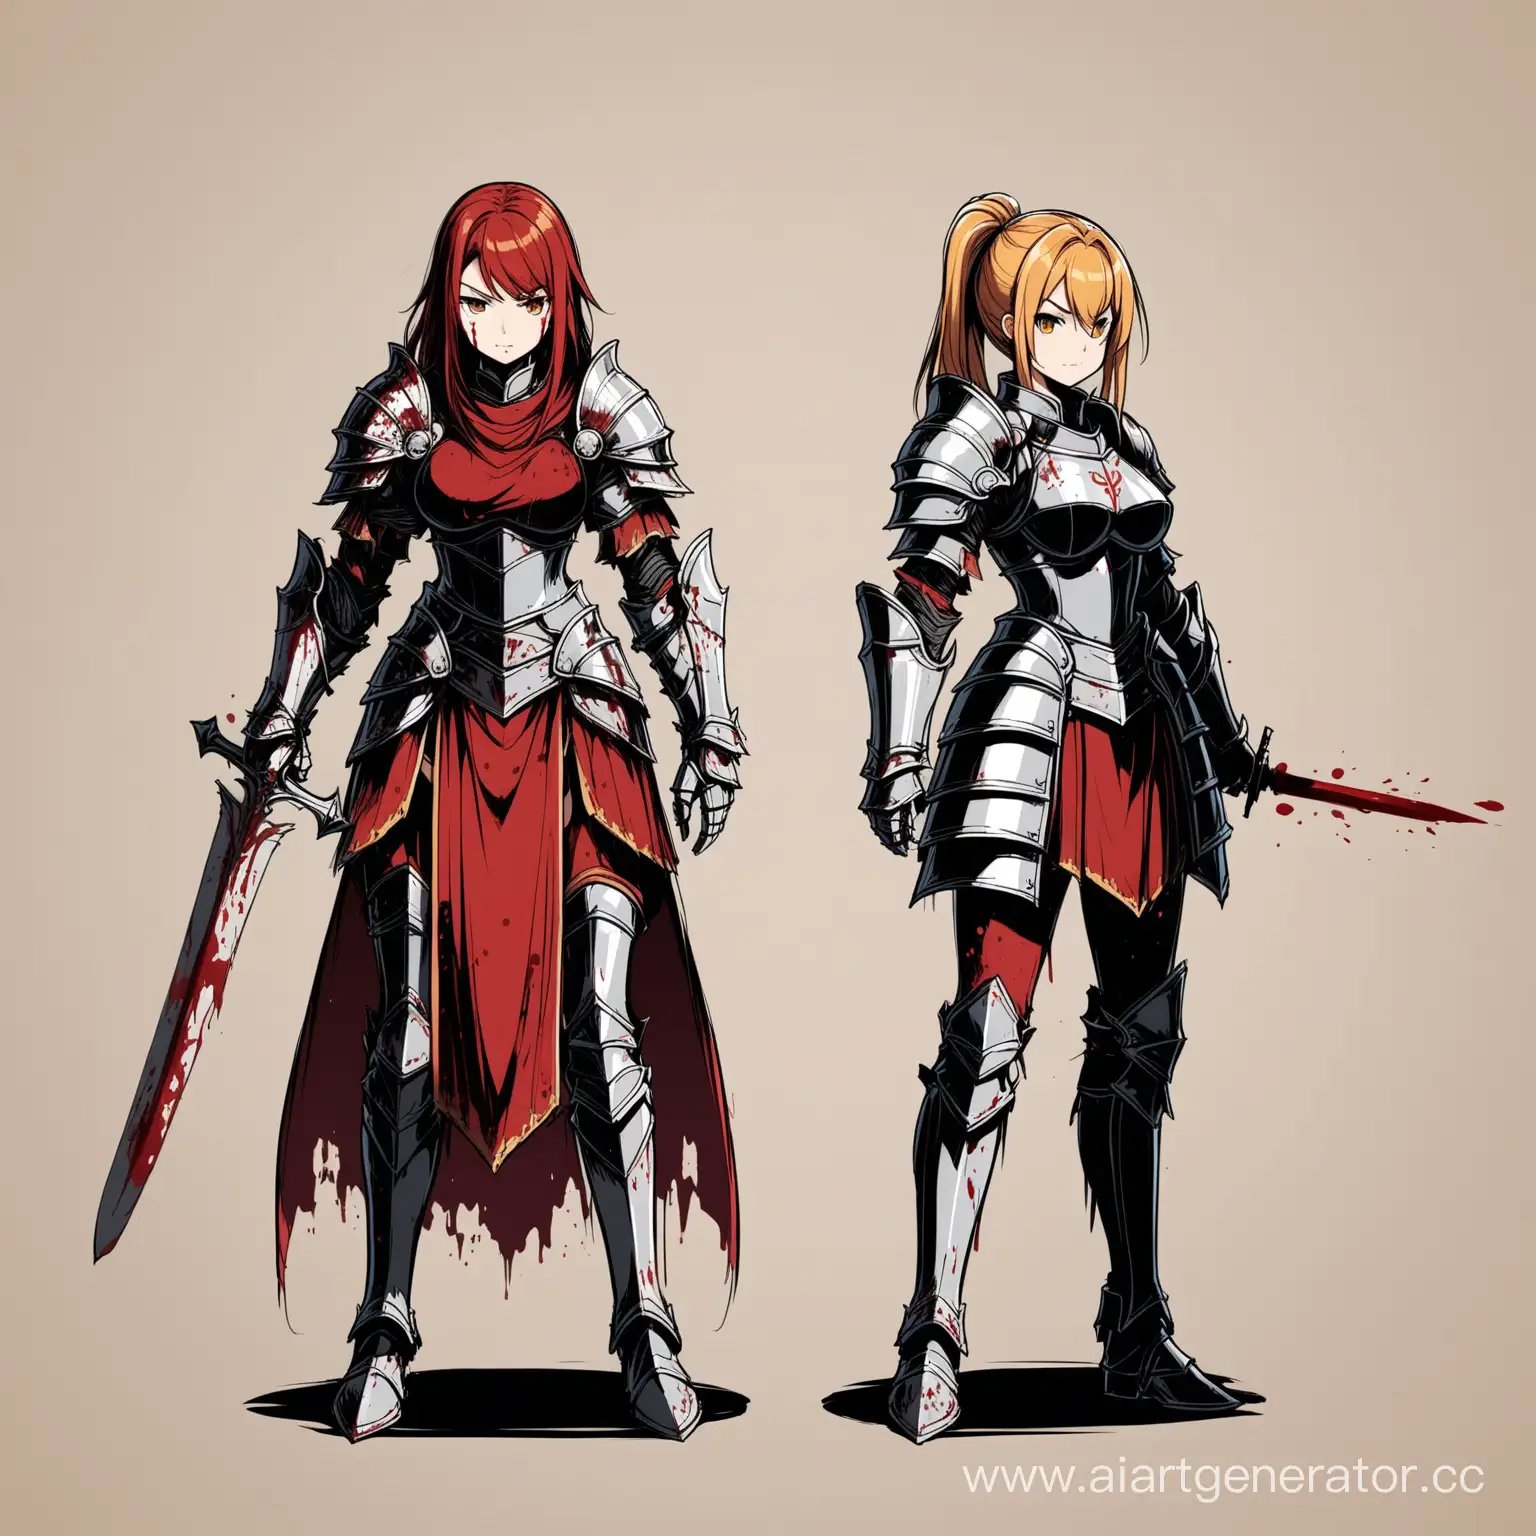 Anime-Style-Warrior-Girls-in-Knight-Armor-with-BloodRed-Aesthetic